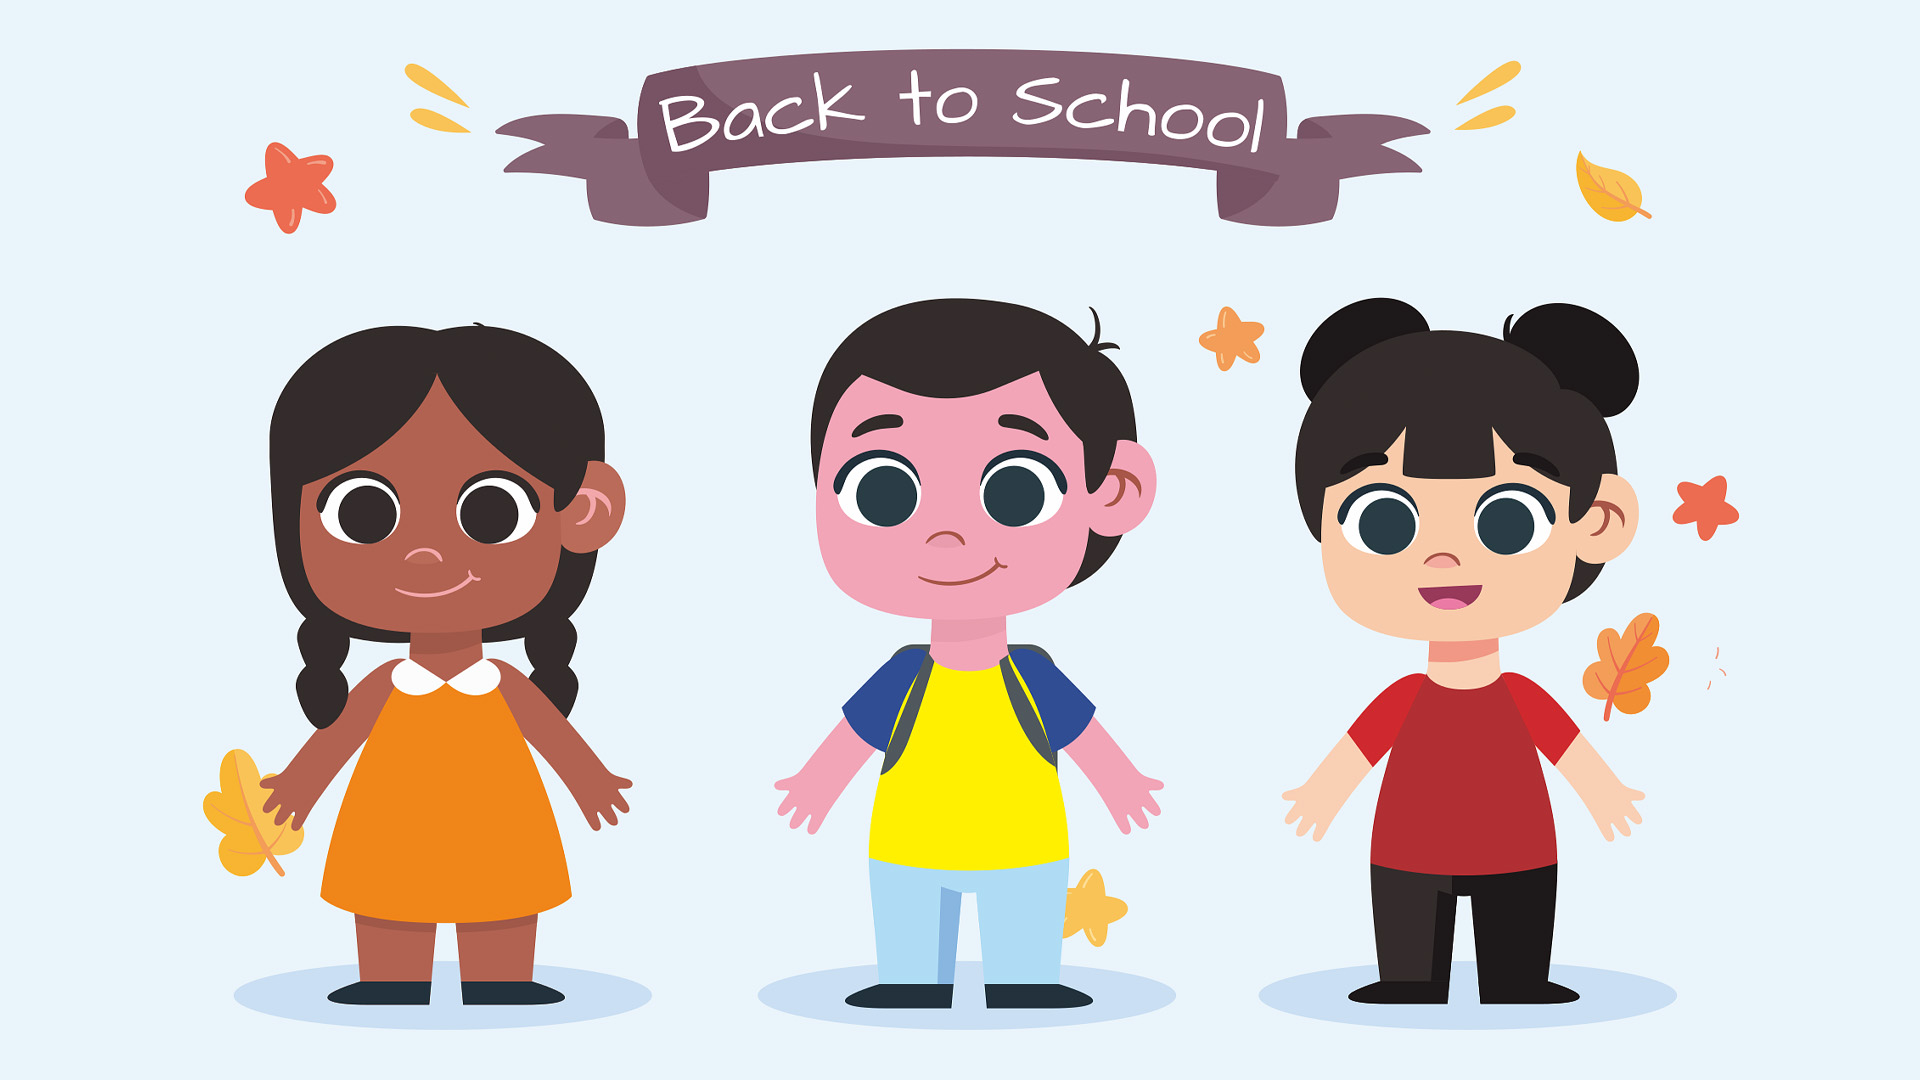 There are 3 animated children standing wearing backpacks. The background is light blue. Across the top of the graphic there is a deep purple banner that reads Back to School